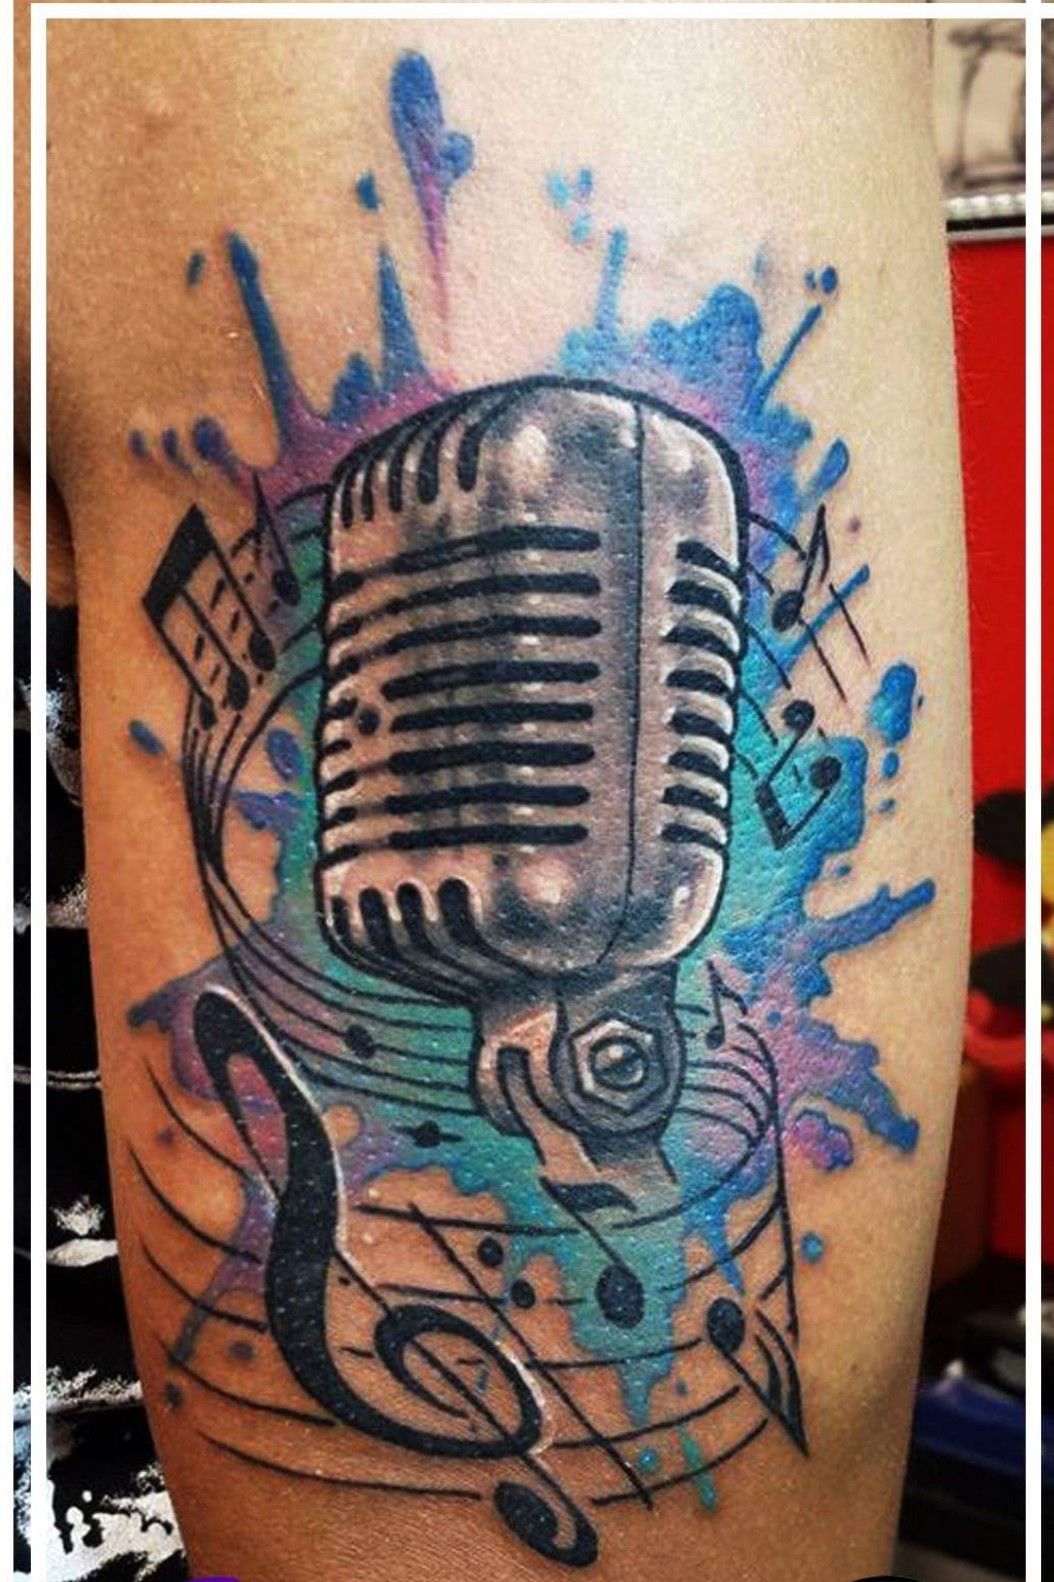 Divine Eye Tattoo Studio  Old fashioned microphone and broken clock for  Tom today done by Glyn birminghamtattoostudio birminghamtattooist  birminghamtattooartist bhfyp tatuaje microphone microphonetattoo  brokenclocks blackandgreytattoo 